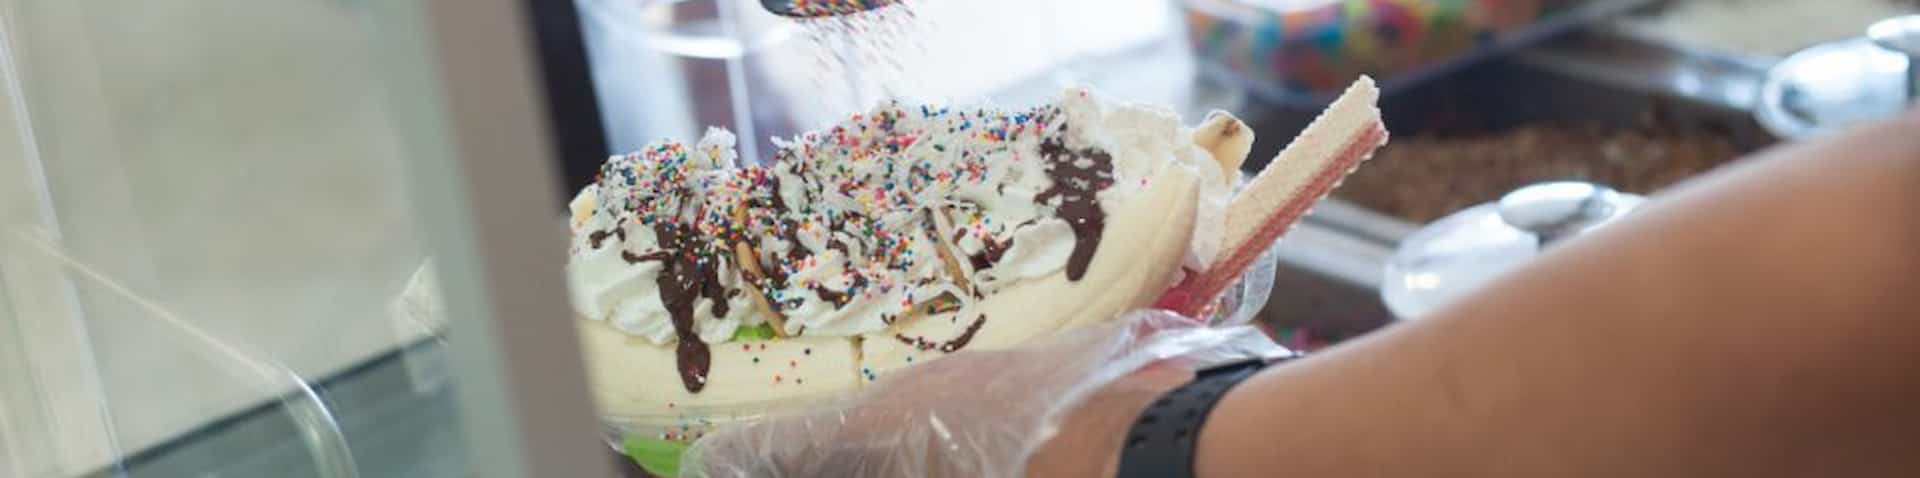 a Mexican dessert with bananas, whipping cream and sprinkles